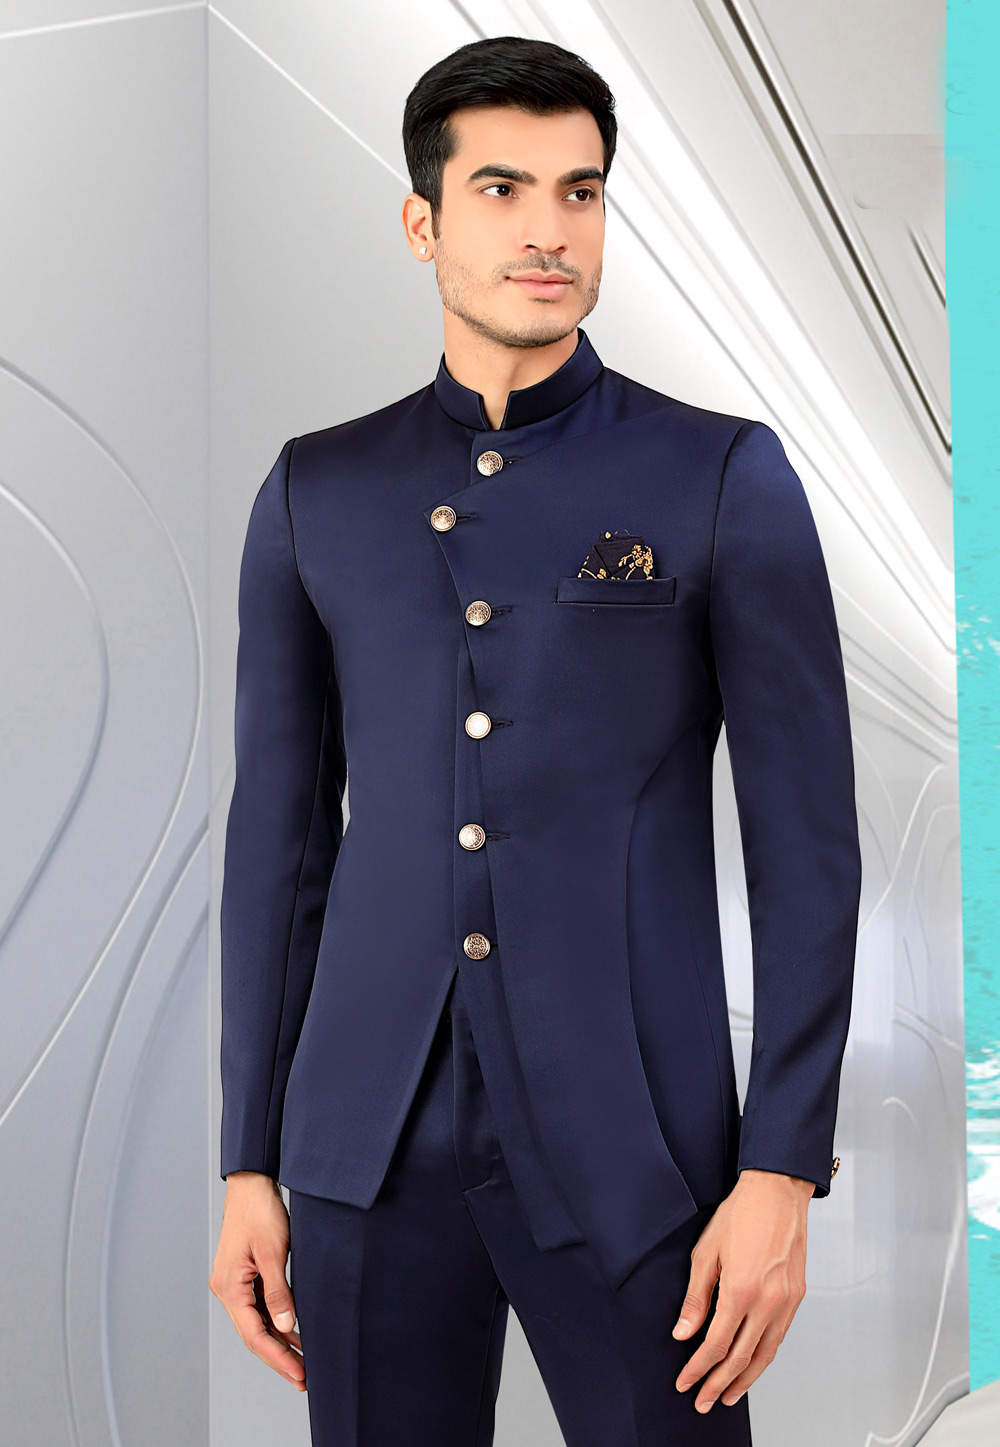 Solid Color Terry Rayon Jodhpuri Suit in Navy Blue : MHG971